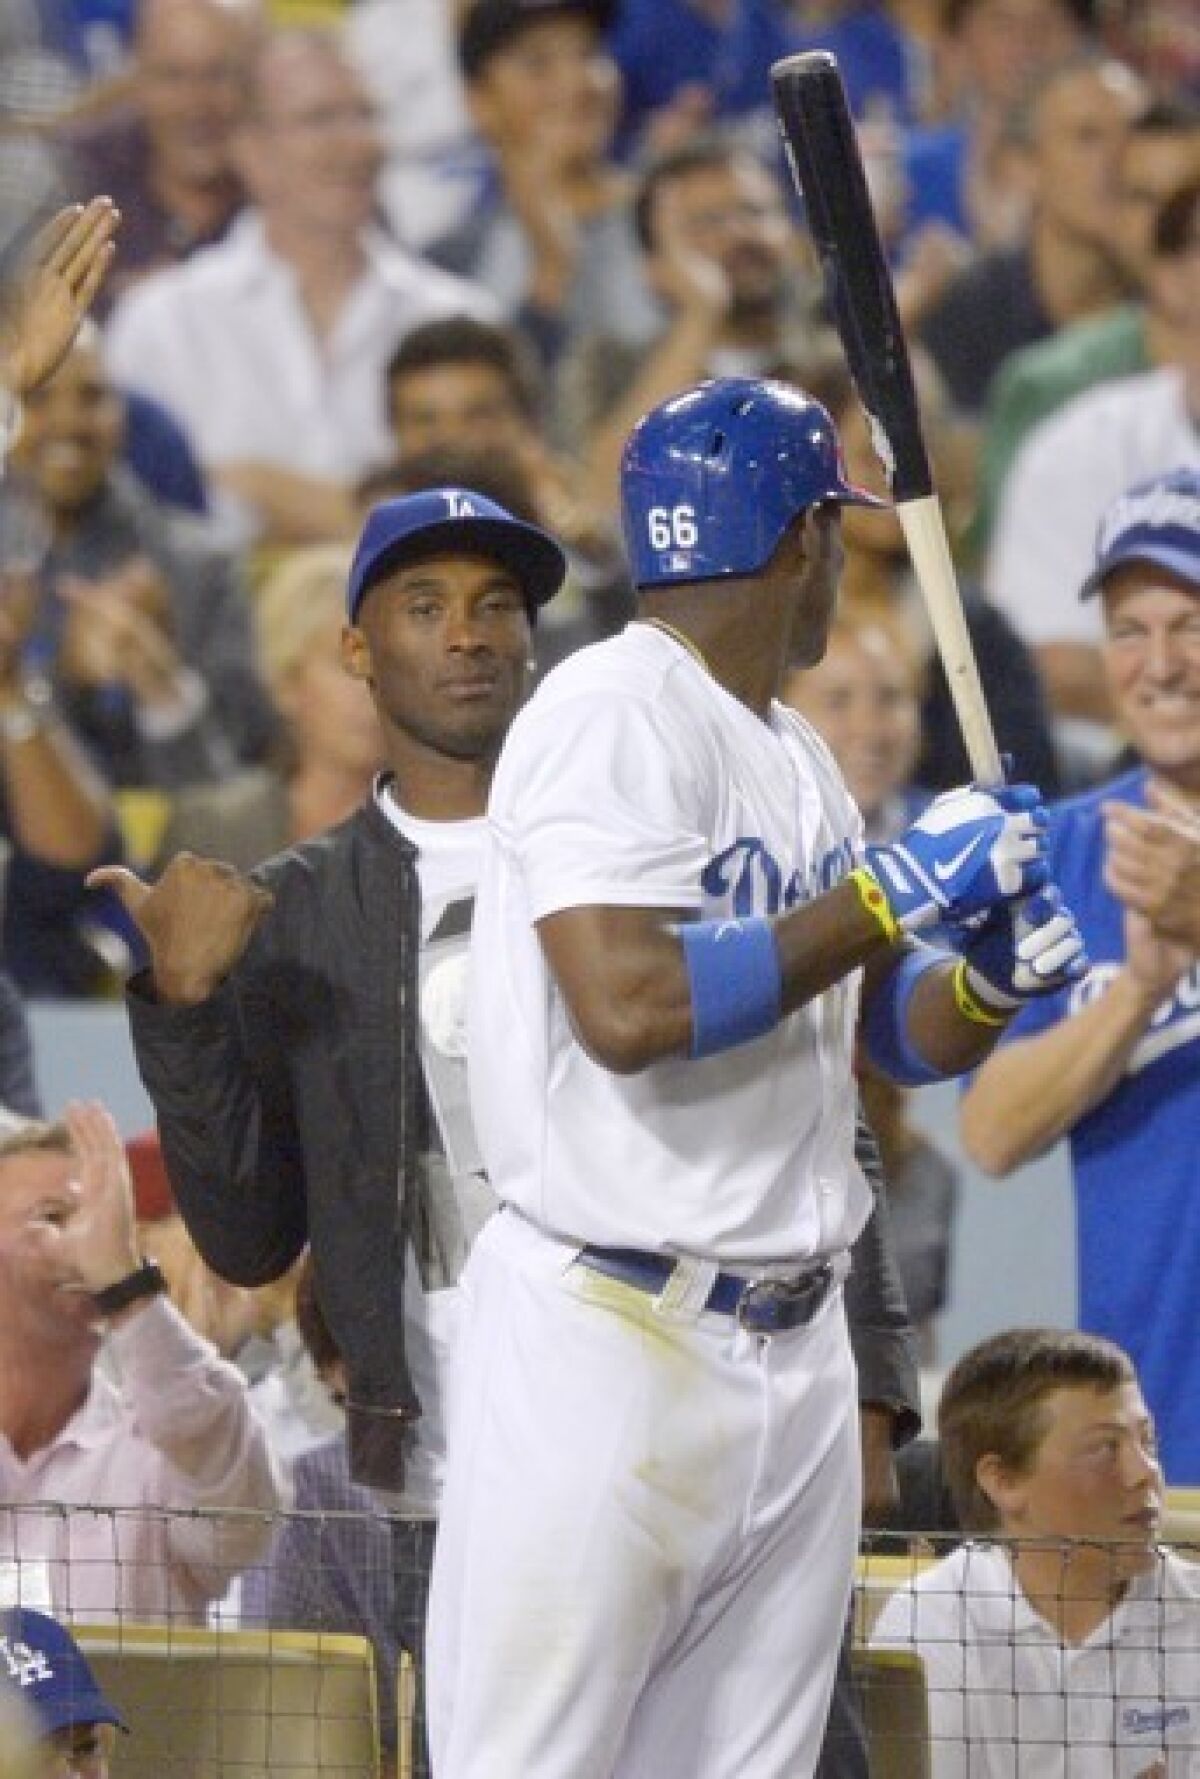 Kobe Bryant, left, gestures as Yasiel Puig looks on during the fourth inning of the Dodgers' matchup with the New York Yankees at Dodger Stadium on Wednesday.